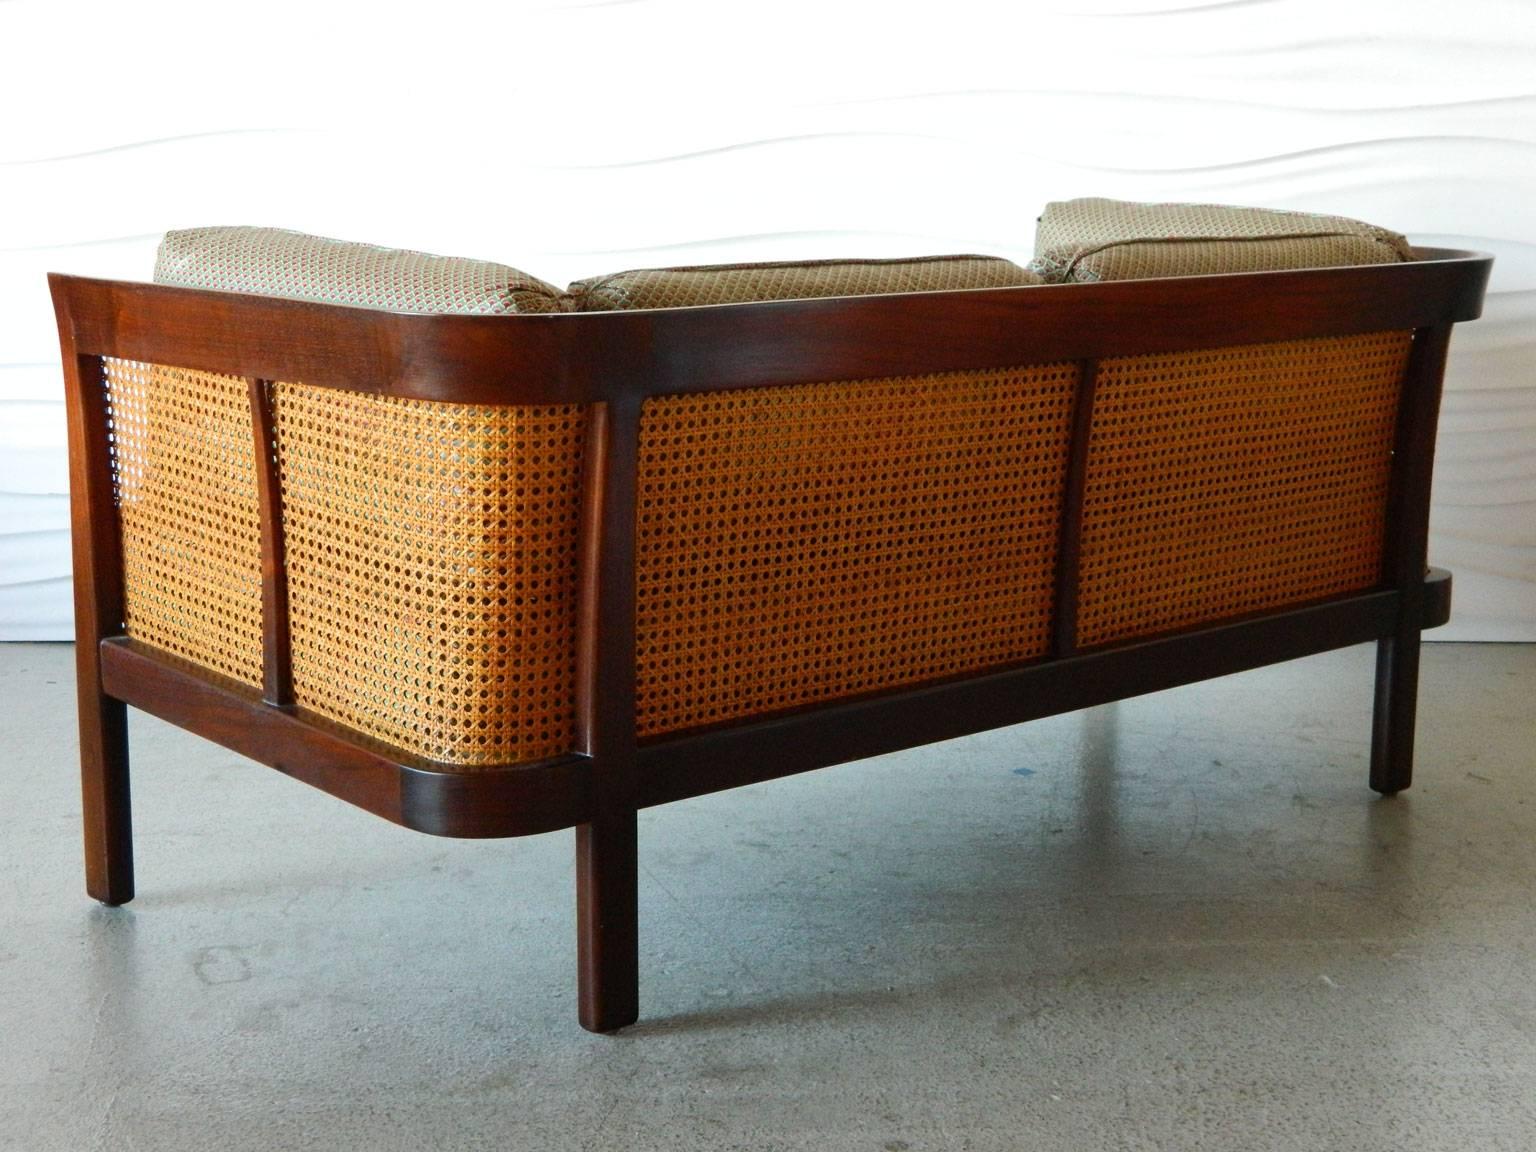 This handsome caned settee by Erwin-Lambeth features a curved walnut frame and original caning. 

In addition to the seat cushion, the settee also has two back cushions and two-side cushions.